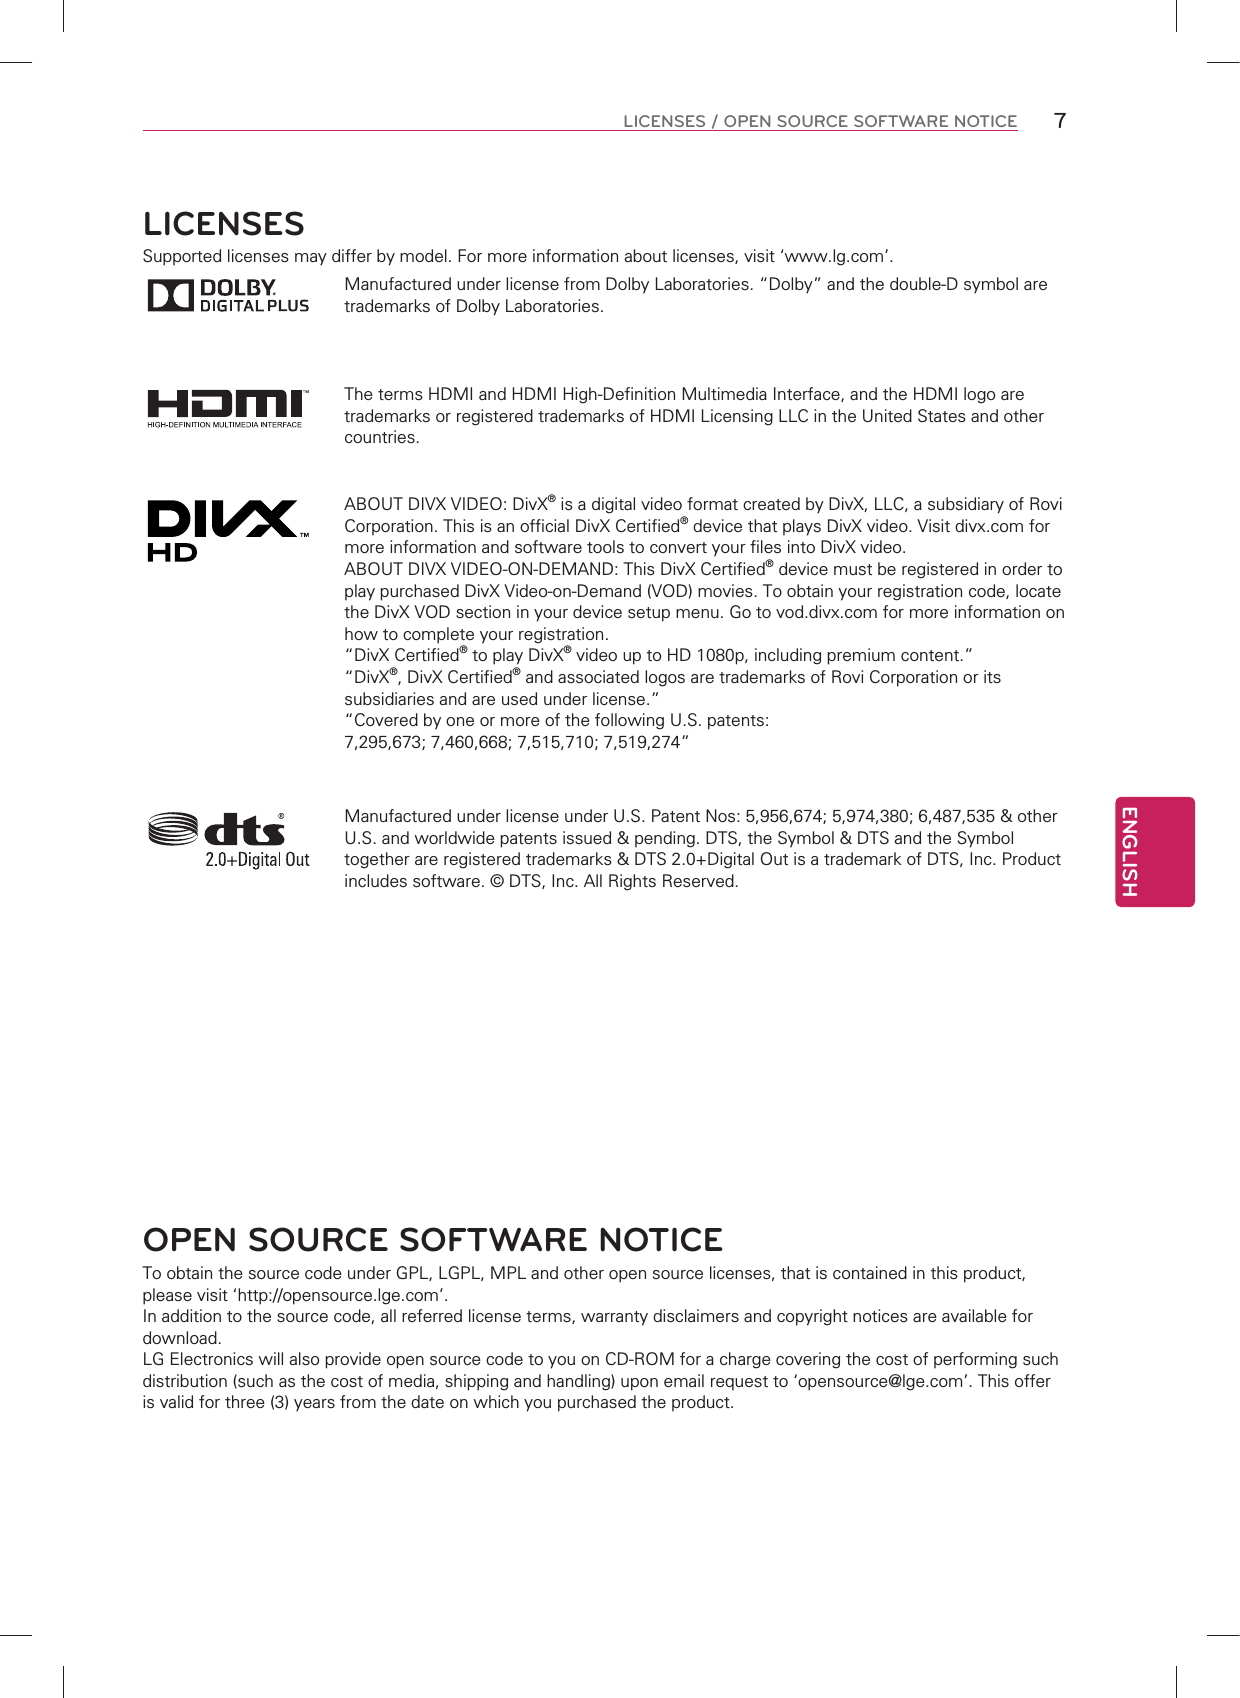 ENGLISH7LICENSES / OPEN SOURCE SOFTWARE NOTICELICENSESSupported licenses may differ by model. For more information about licenses, visit ‘www.lg.com’.Manufactured under license from Dolby Laboratories. “Dolby” and the double-D symbol are trademarks of Dolby Laboratories.The terms HDMI and HDMI High-Definition Multimedia Interface, and the HDMI logo are trademarks or registered trademarks of HDMI Licensing LLC in the United States and other countries.ABOUT DIVX VIDEO: DivX® is a digital video format created by DivX, LLC, a subsidiary of Rovi Corporation. This is an official DivX Certified® device that plays DivX video. Visit divx.com for more information and software tools to convert your files into DivX video.ABOUT DIVX VIDEO-ON-DEMAND: This DivX Certified® device must be registered in order to play purchased DivX Video-on-Demand (VOD) movies. To obtain your registration code, locate the DivX VOD section in your device setup menu. Go to vod.divx.com for more information on how to complete your registration. “DivX Certified® to play DivX® video up to HD 1080p, including premium content.”“DivX®, DivX Certified® and associated logos are trademarks of Rovi Corporation or its subsidiaries and are used under license.”“Covered by one or more of the following U.S. patents: 7,295,673; 7,460,668; 7,515,710; 7,519,274”Manufactured under license under U.S. Patent Nos: 5,956,674; 5,974,380; 6,487,535 &amp; other U.S. and worldwide patents issued &amp; pending. DTS, the Symbol &amp; DTS and the Symbol together are registered trademarks &amp; DTS 2.0+Digital Out is a trademark of DTS, Inc. Product includes software. © DTS, Inc. All Rights Reserved.OPEN SOURCE SOFTWARE NOTICETo obtain the source code under GPL, LGPL, MPL and other open source licenses, that is contained in this product, please visit ‘http://opensource.lge.com’.In addition to the source code, all referred license terms, warranty disclaimers and copyright notices are available for download.LG Electronics will also provide open source code to you on CD-ROM for a charge covering the cost of performing such distribution (such as the cost of media, shipping and handling) upon email request to ‘opensource@lge.com’. This offer is valid for three (3) years from the date on which you purchased the product.